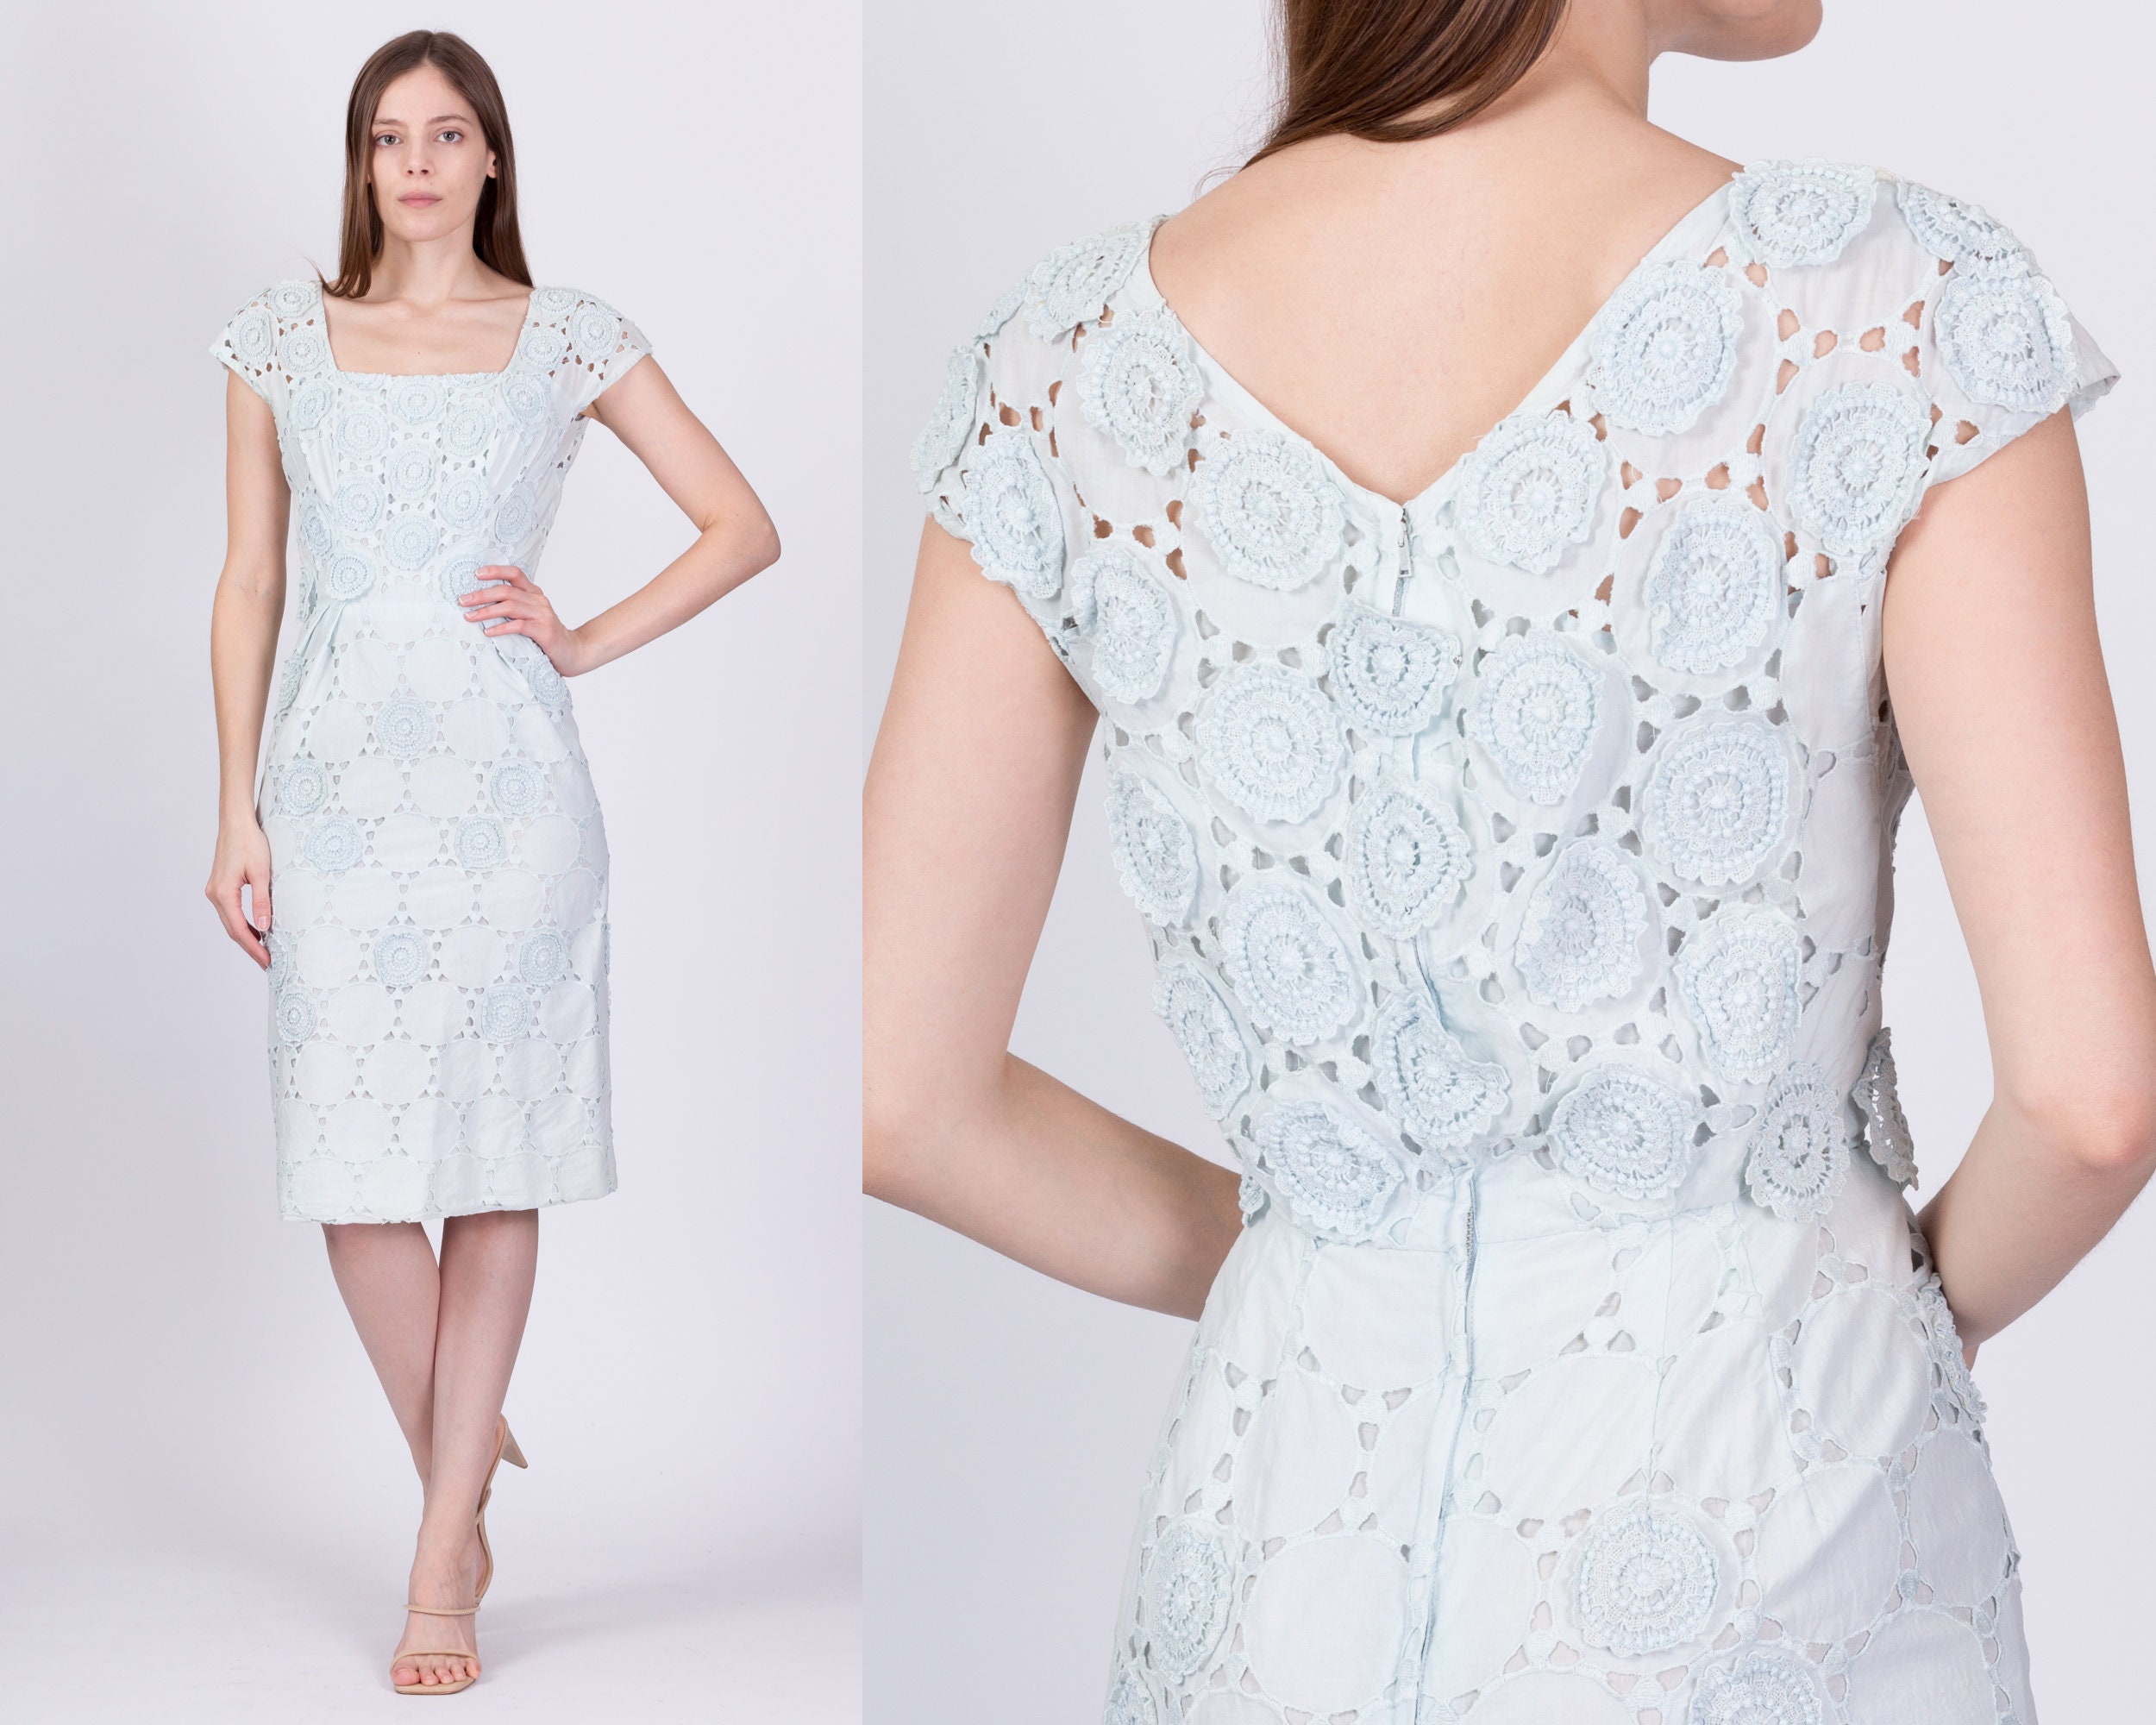 Pale Blue Baby Doll Dress with Contrast Embroidery → Juliet Dunn London